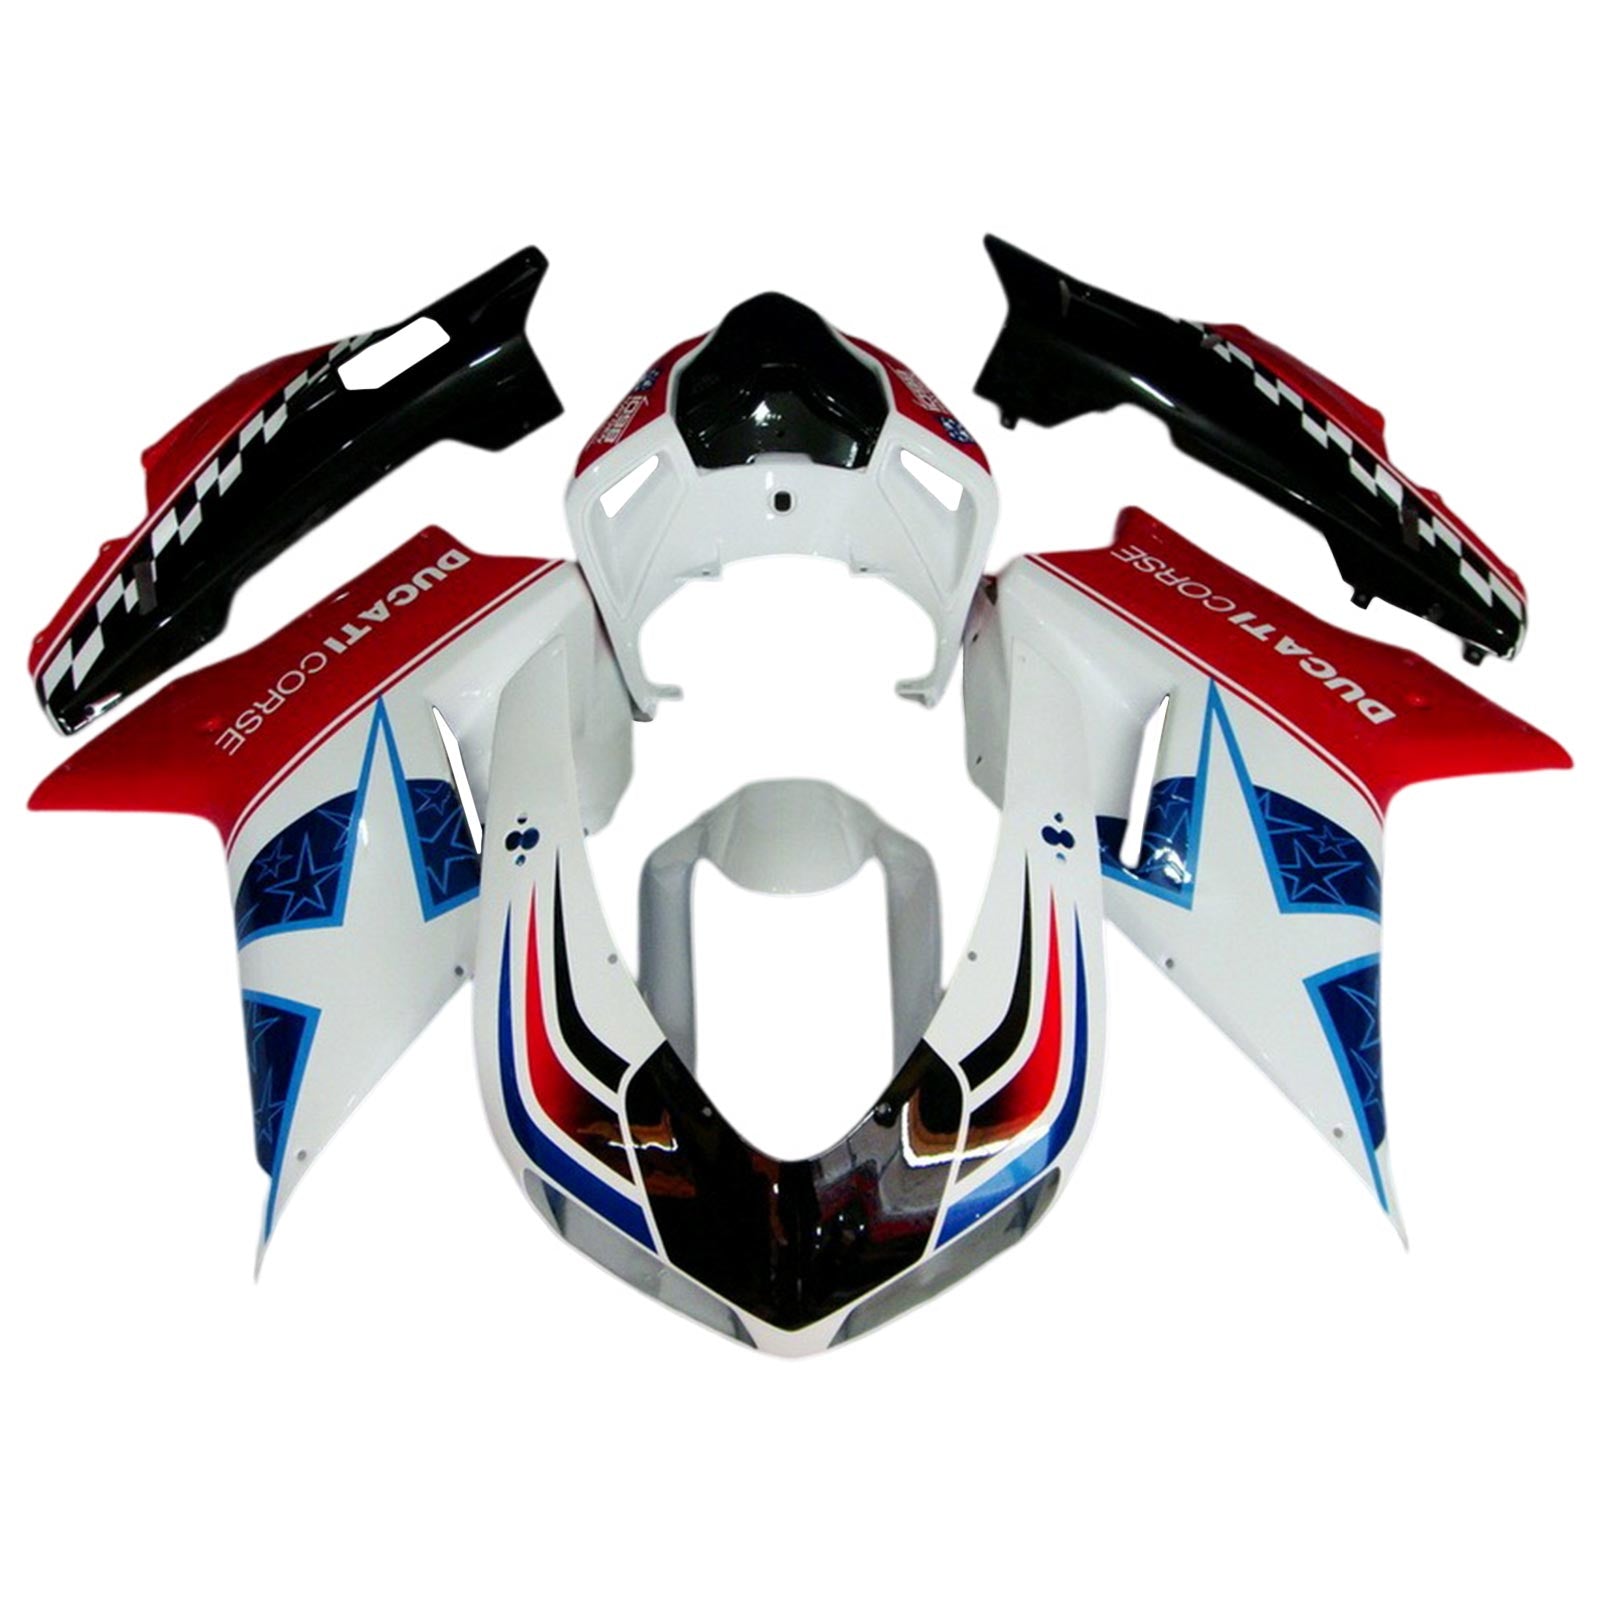 Amotopart All Years Ducati 1098 1198 848 Red&Blue Style1 Fairing Kit